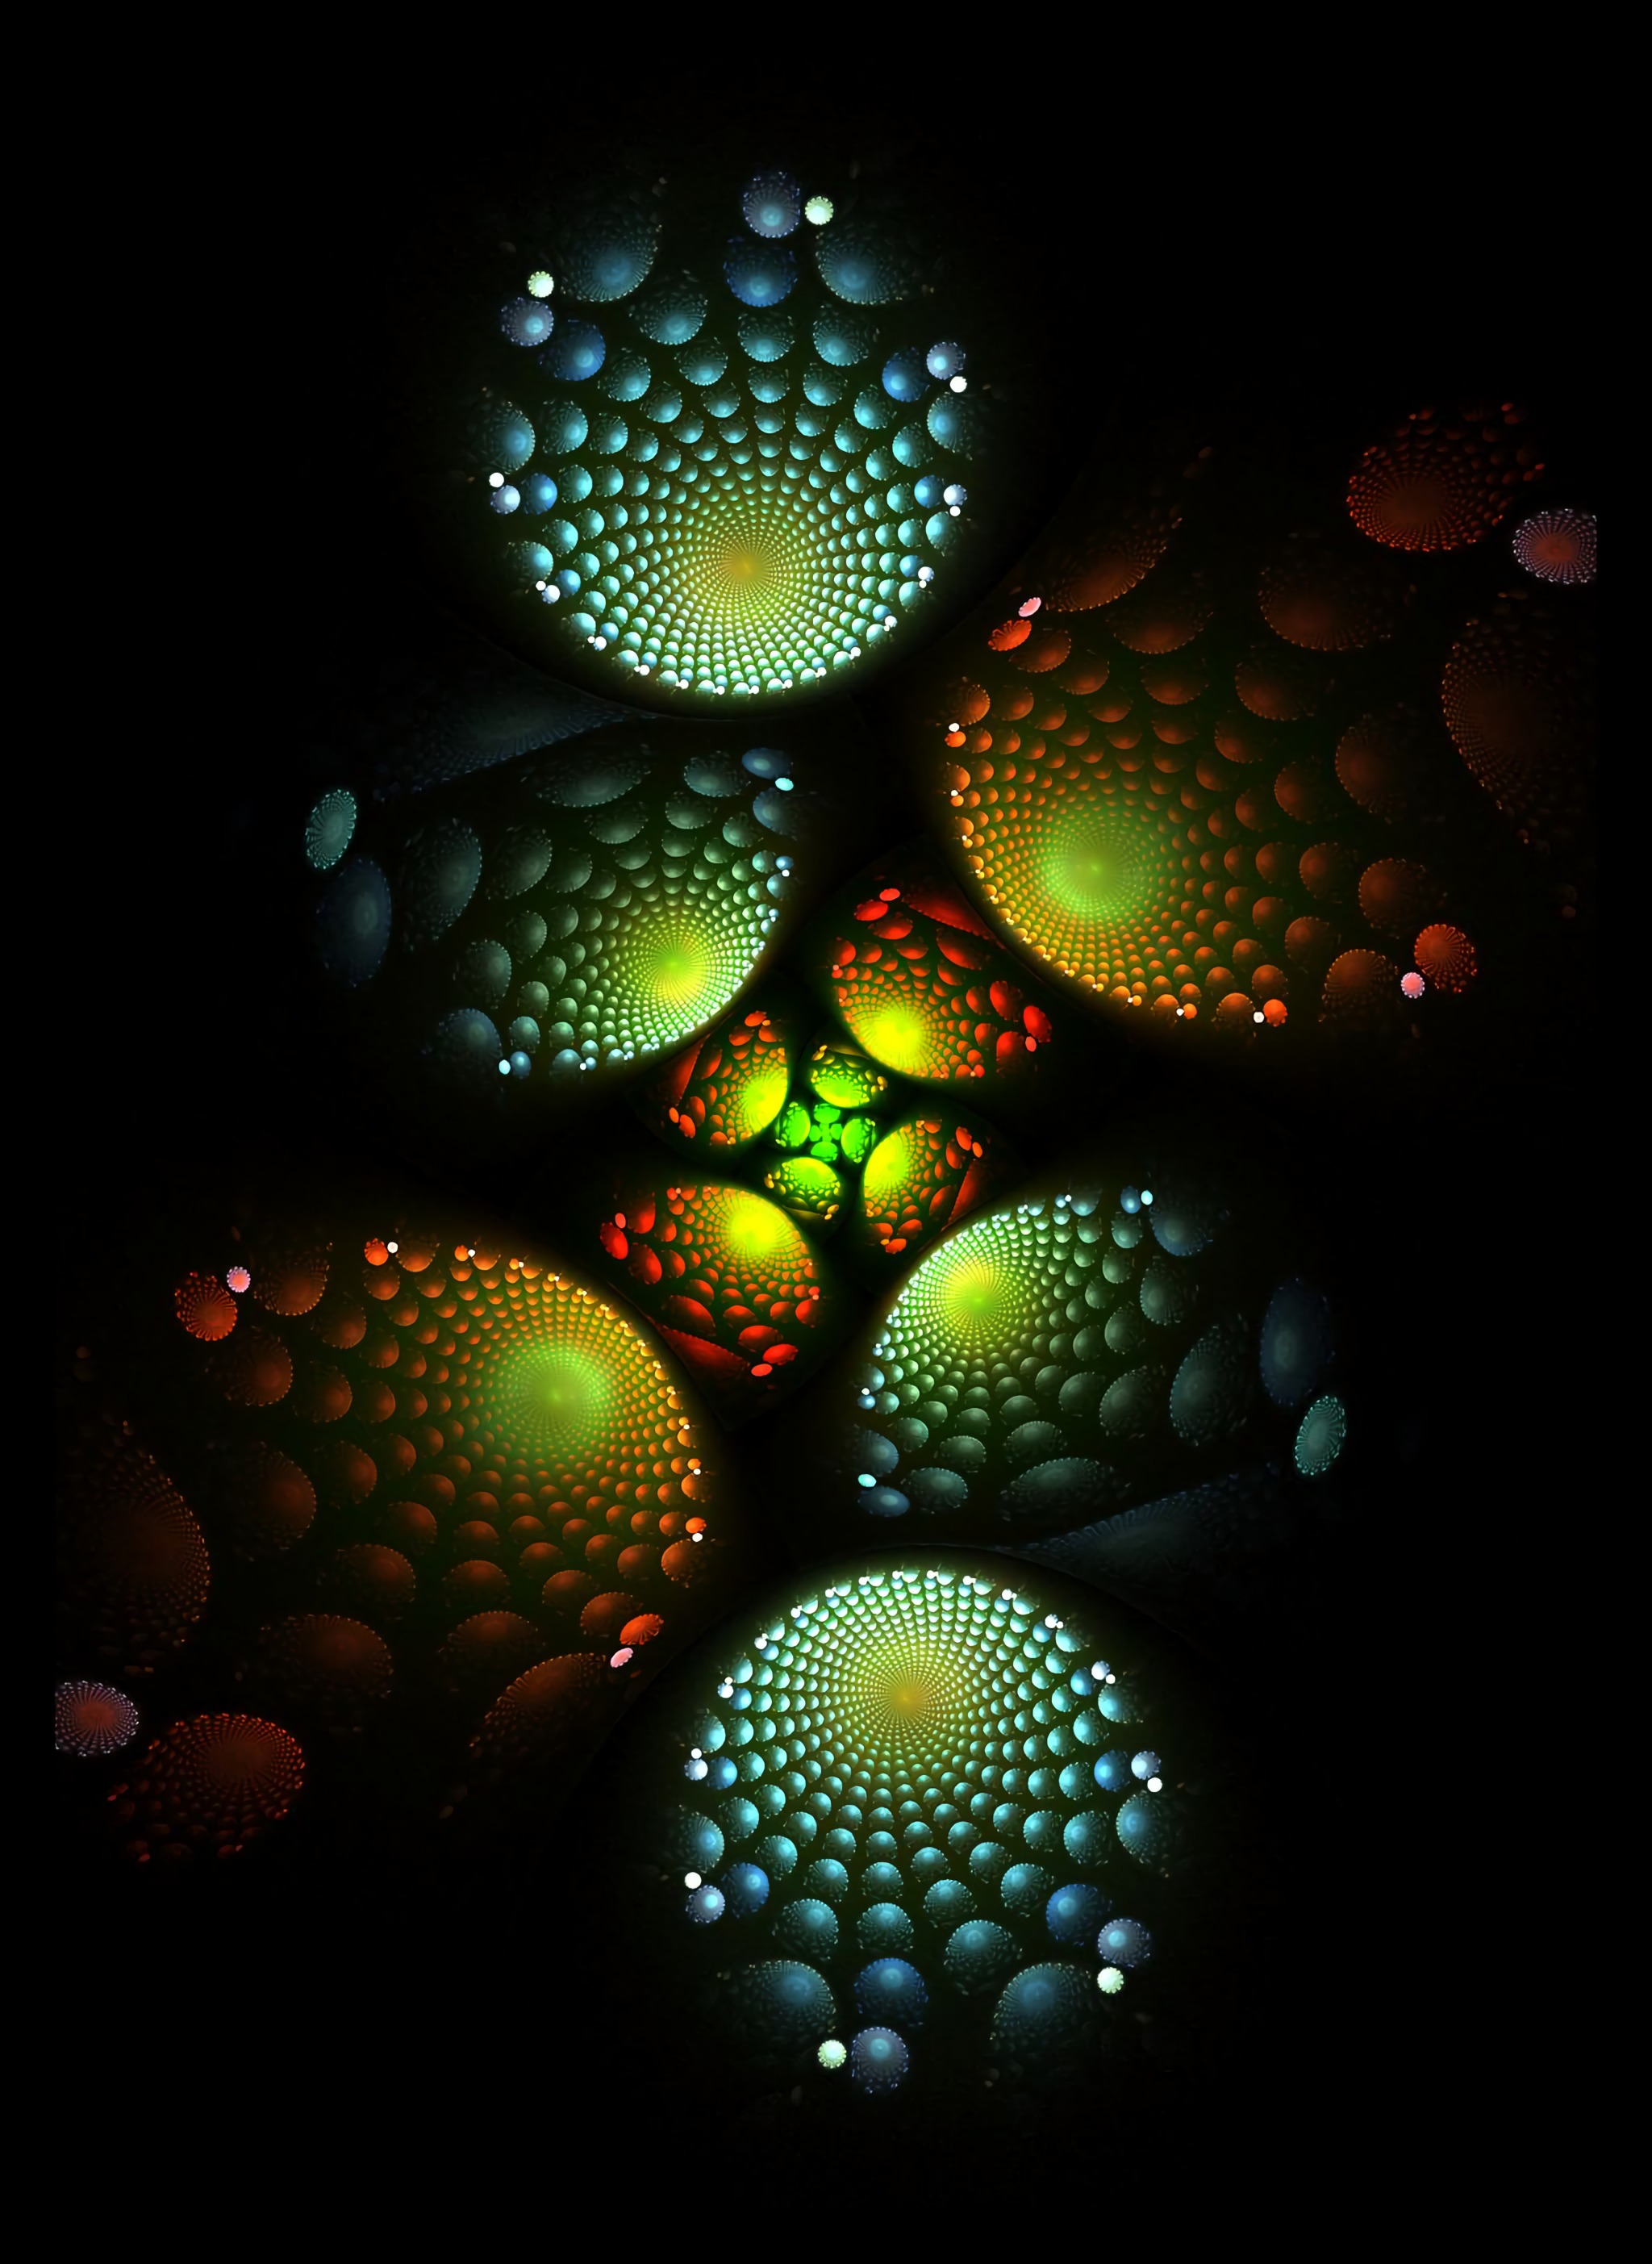 fractal, spirals, abstract, dark, glow, spiral wallpapers for tablet